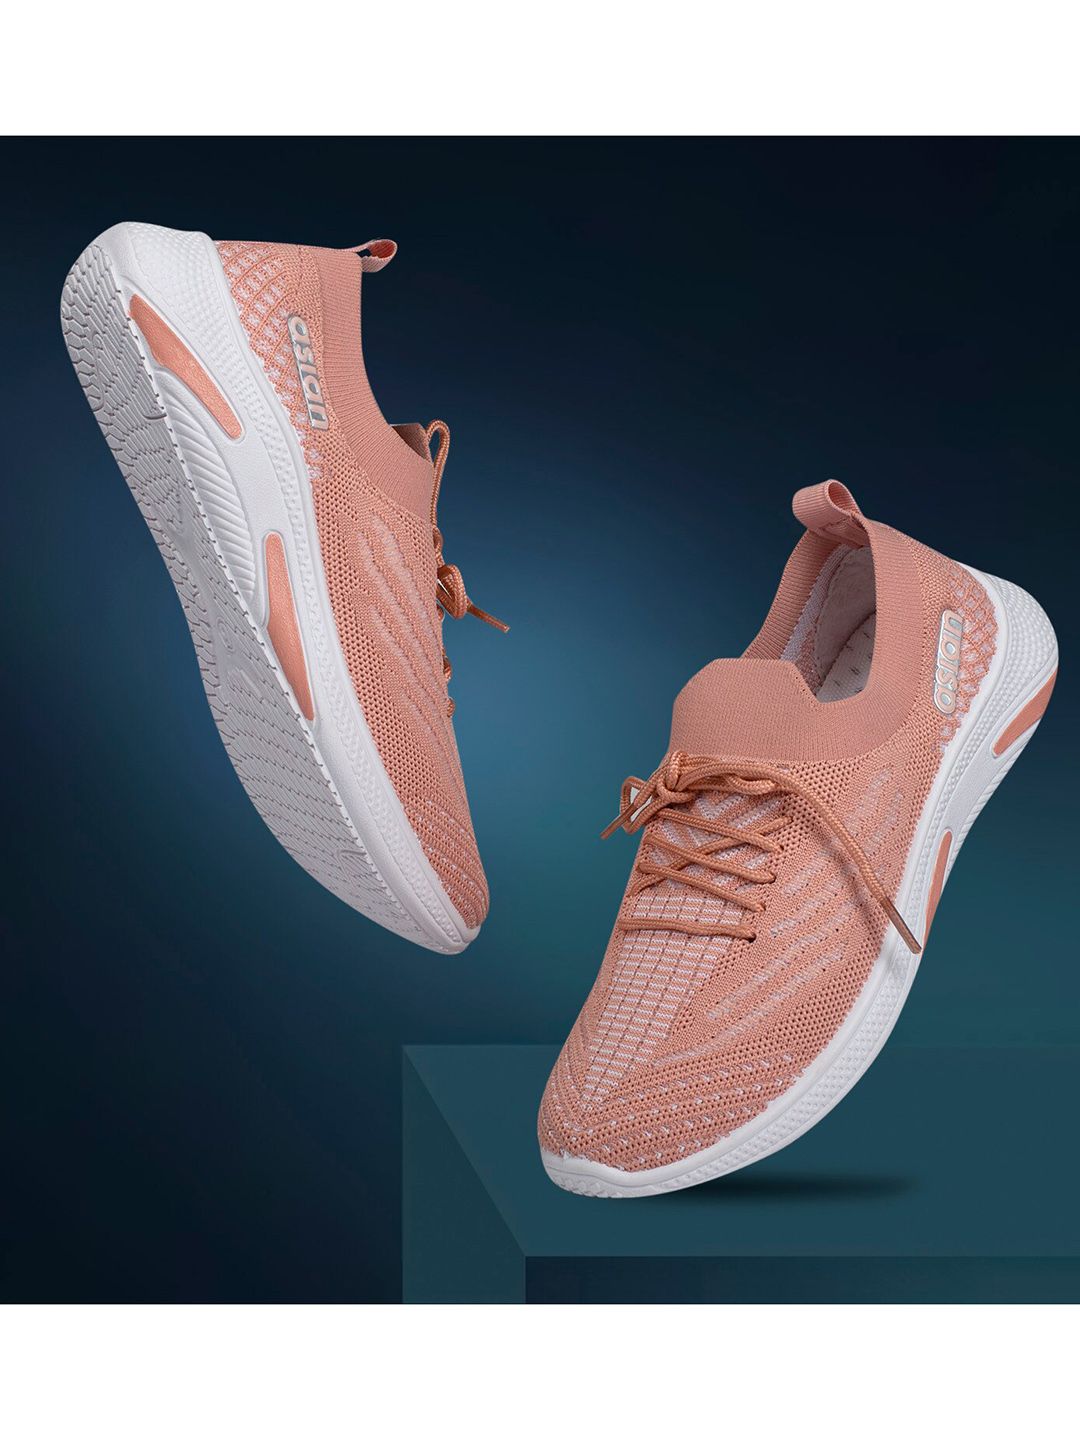 ASIAN Women Peach-Coloured Solid Sneakers Price in India